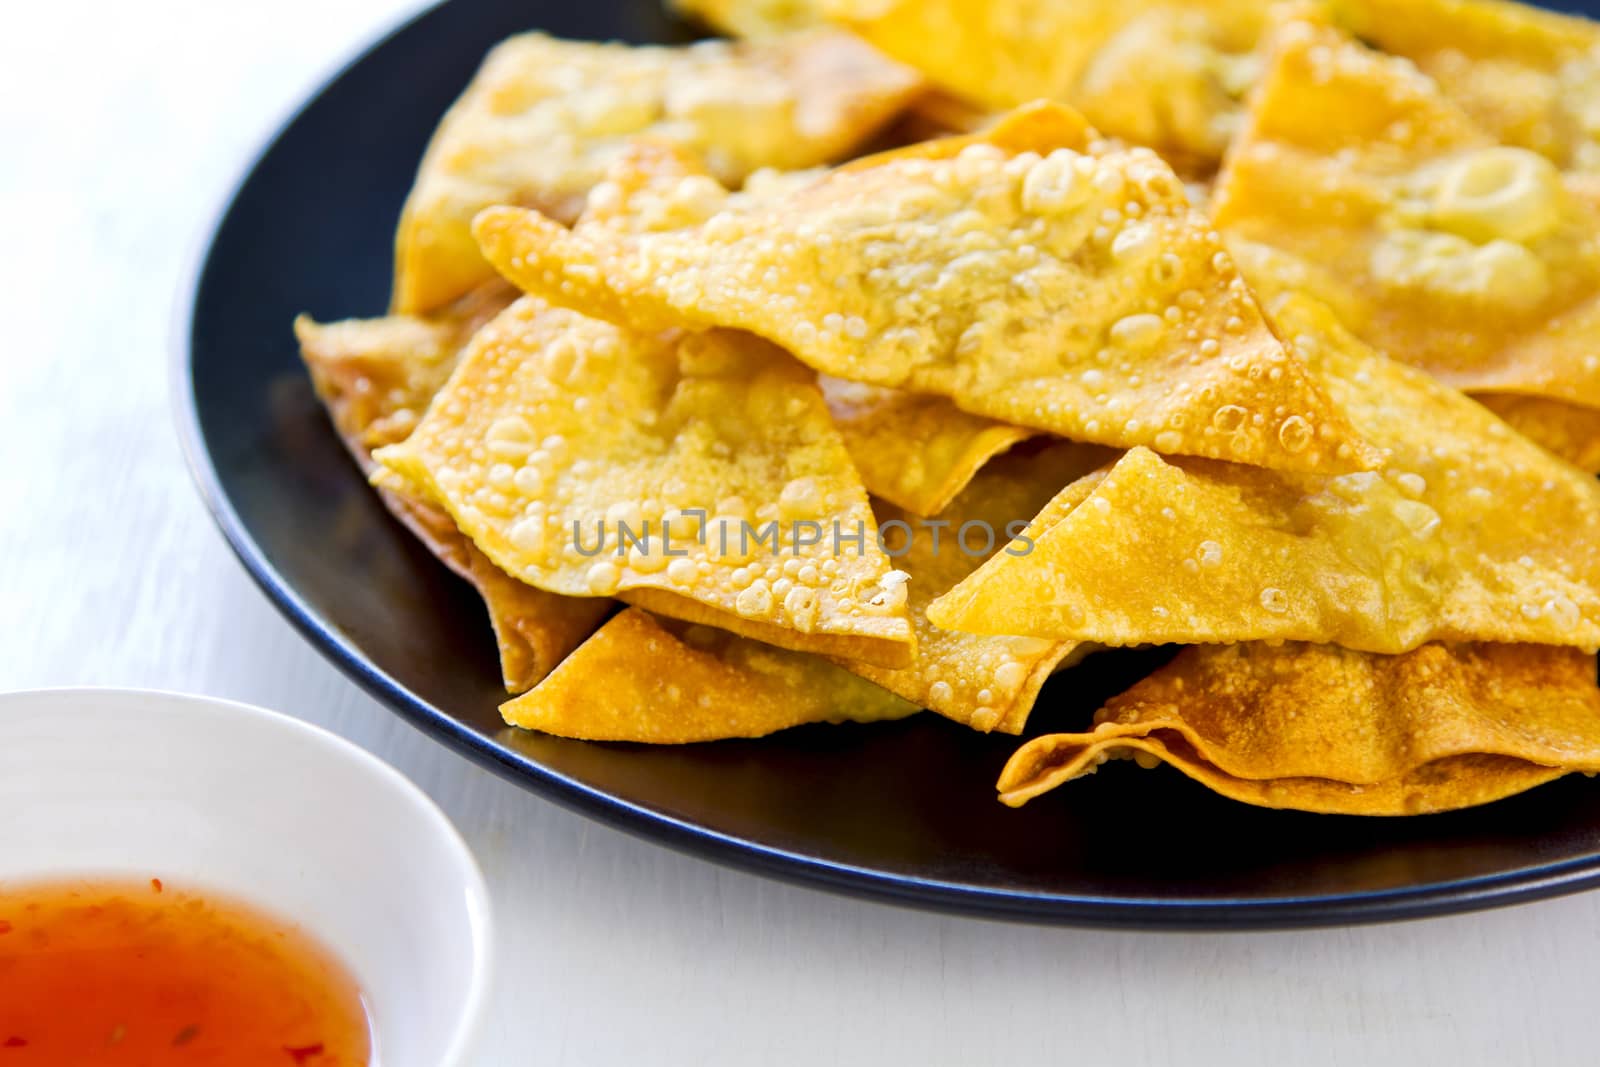 Deep fried Wonton pastry by vanillaechoes